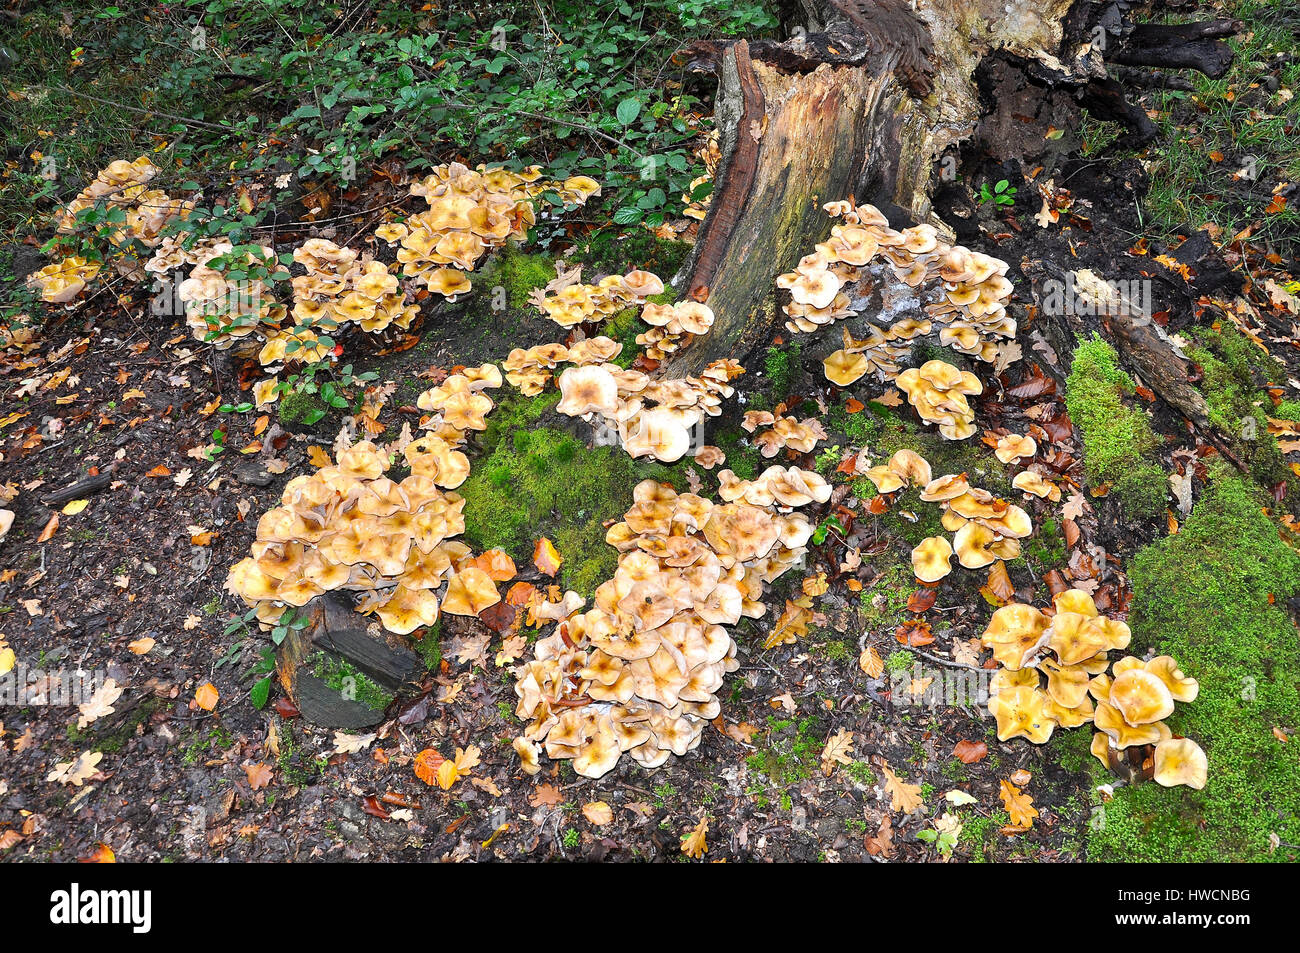 Honey fungus around the base of an oak tree stump in the New Forest National Park, England Stock Photo